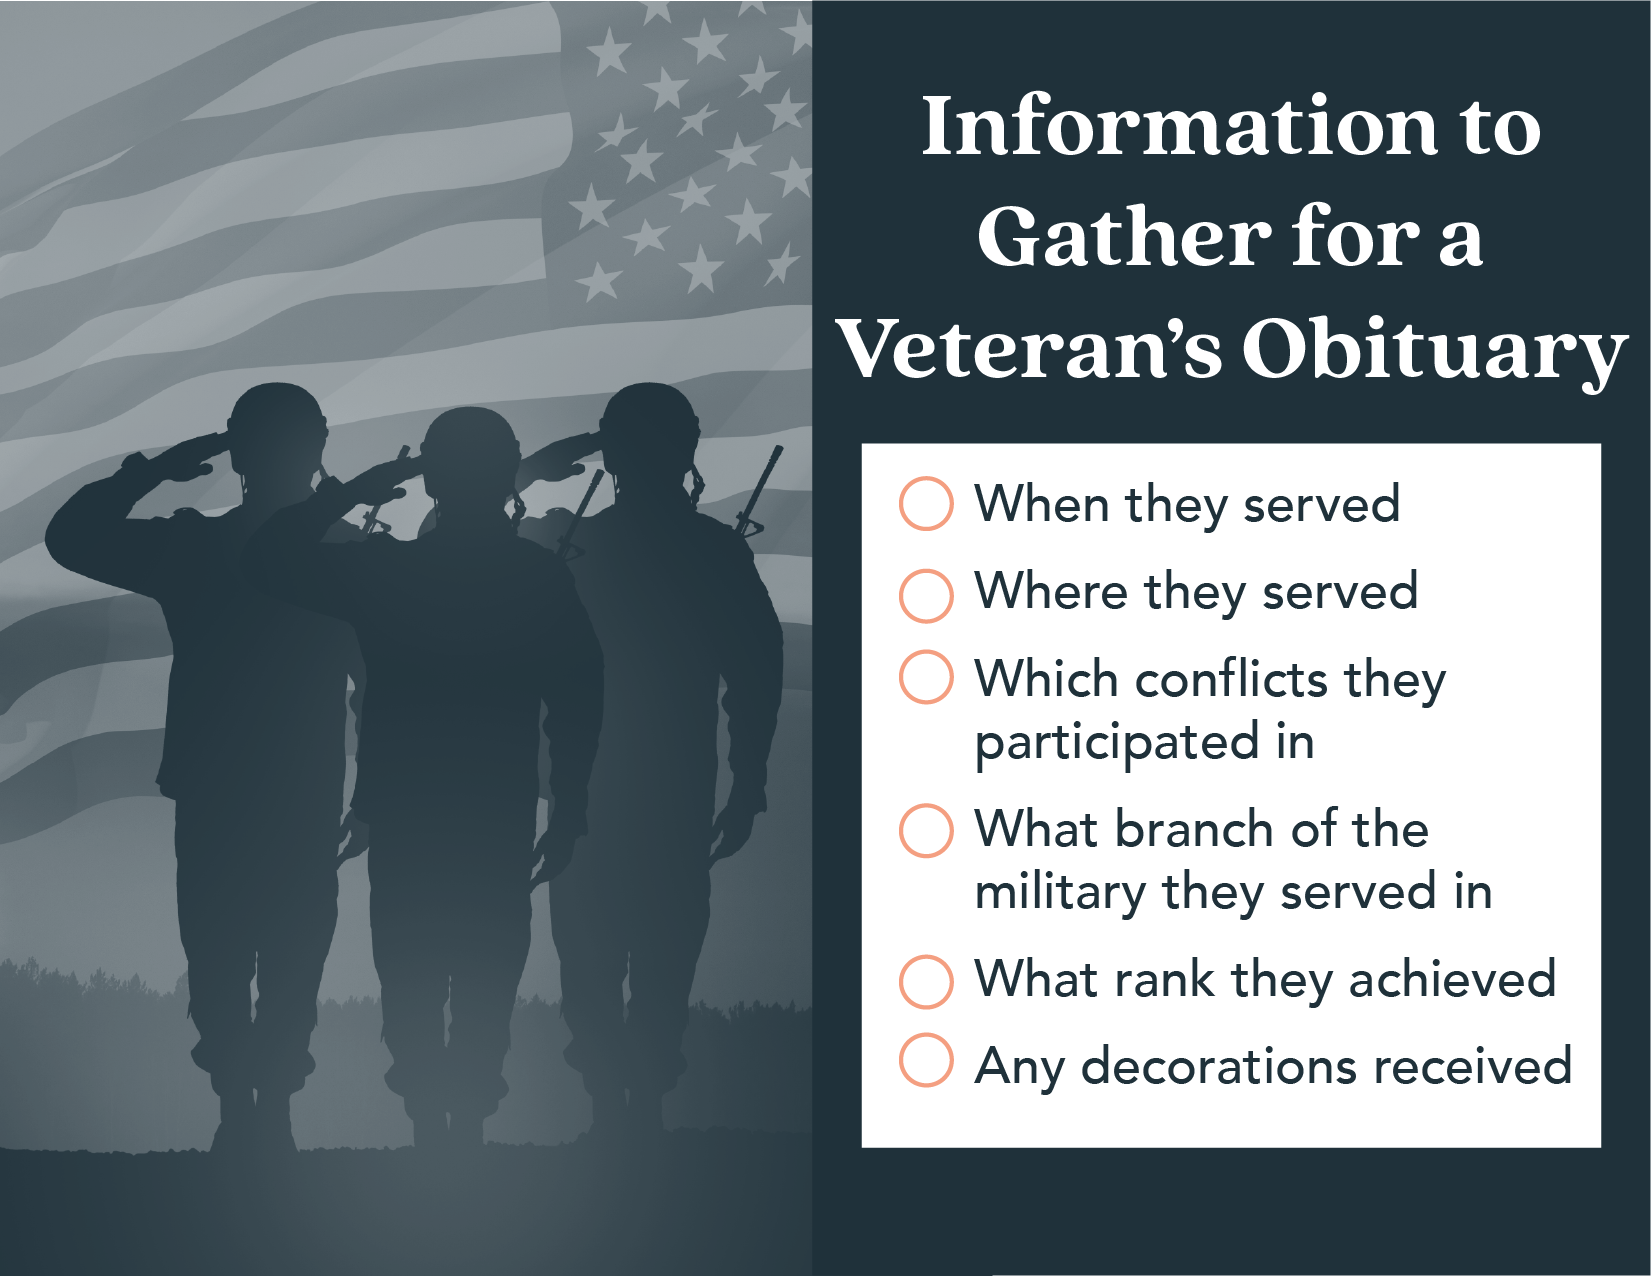 Information to Gather for a Veteran's Obituary